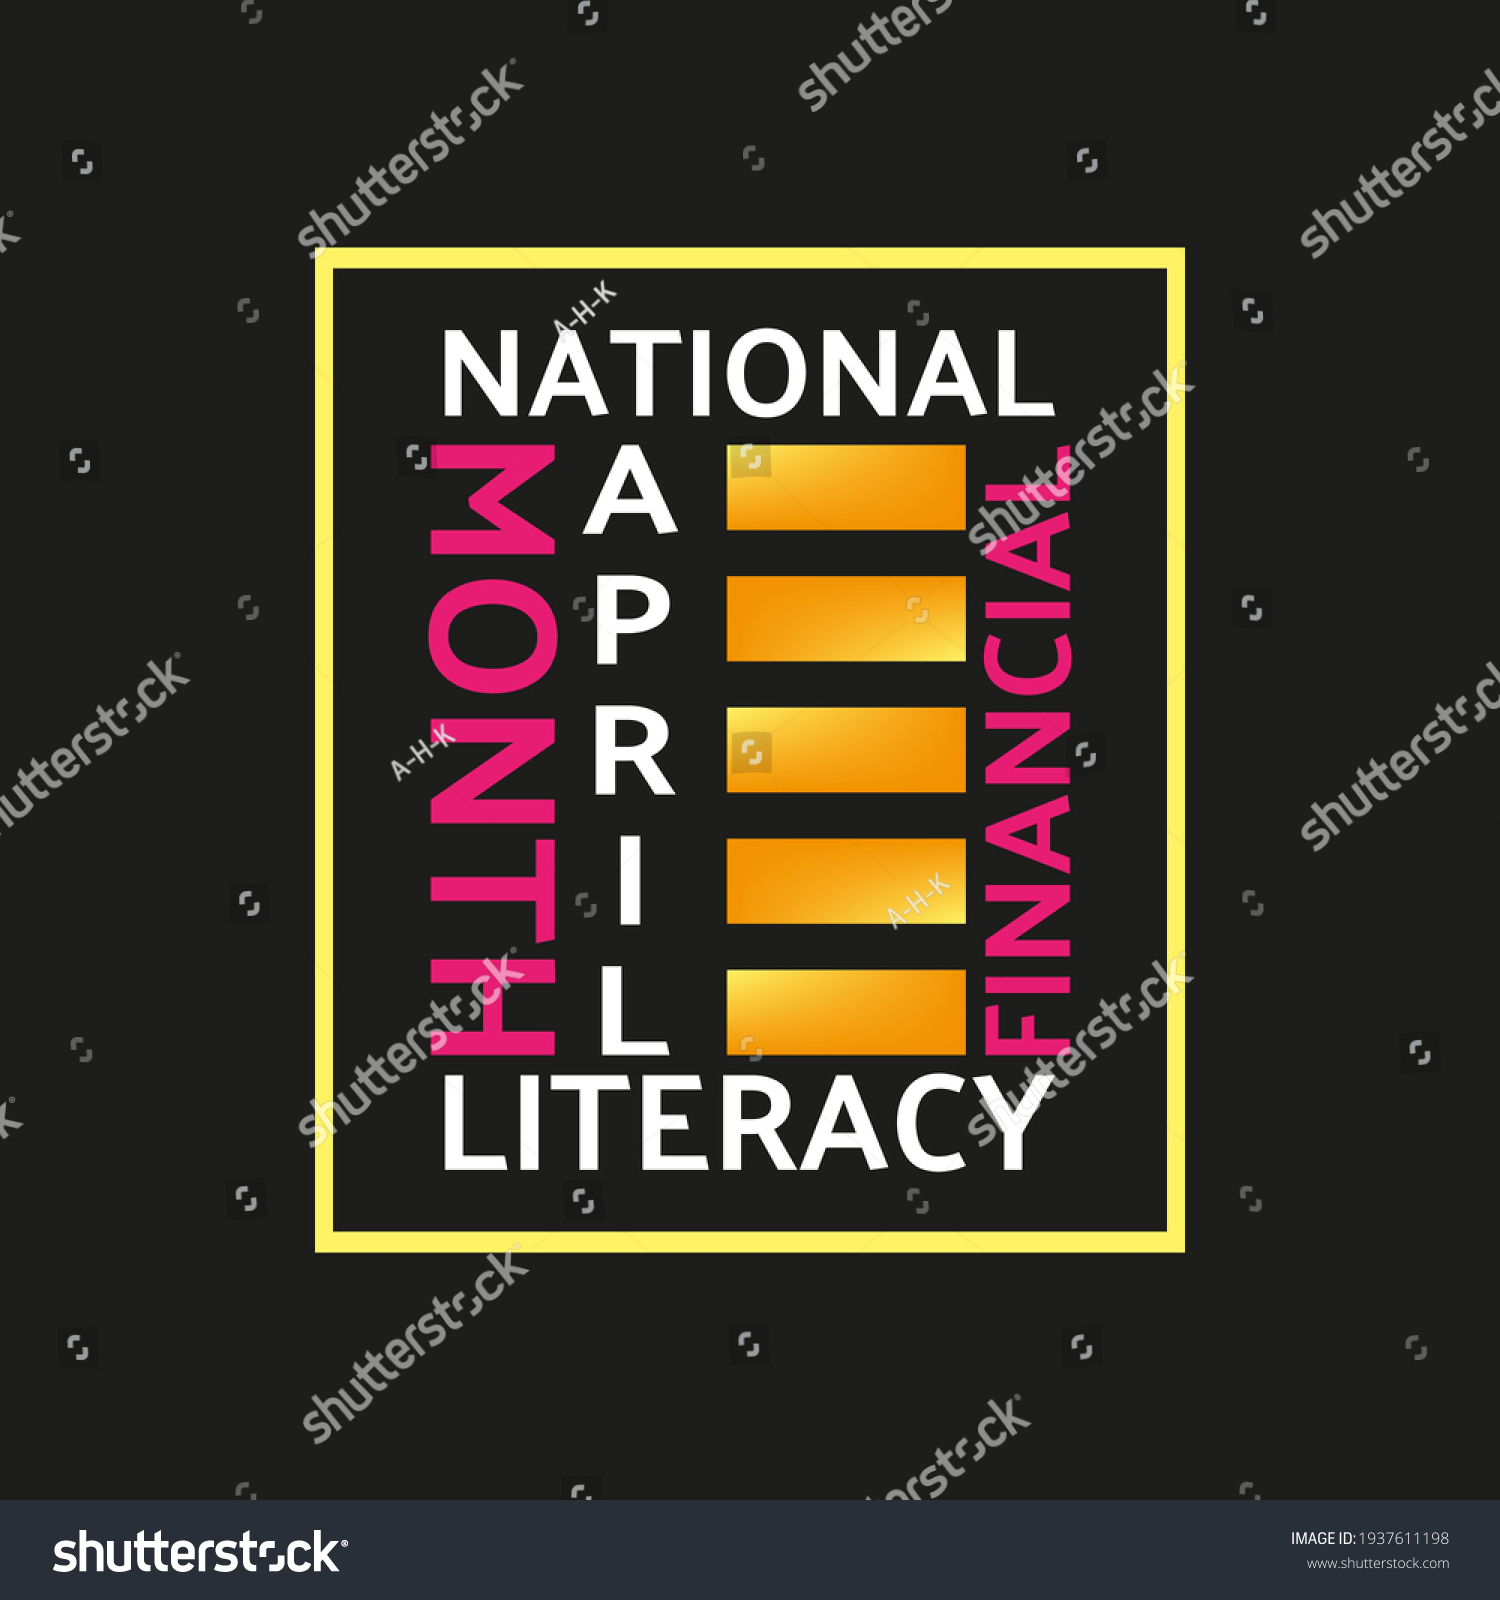 16 National financial literacy month Images, Stock Photos & Vectors